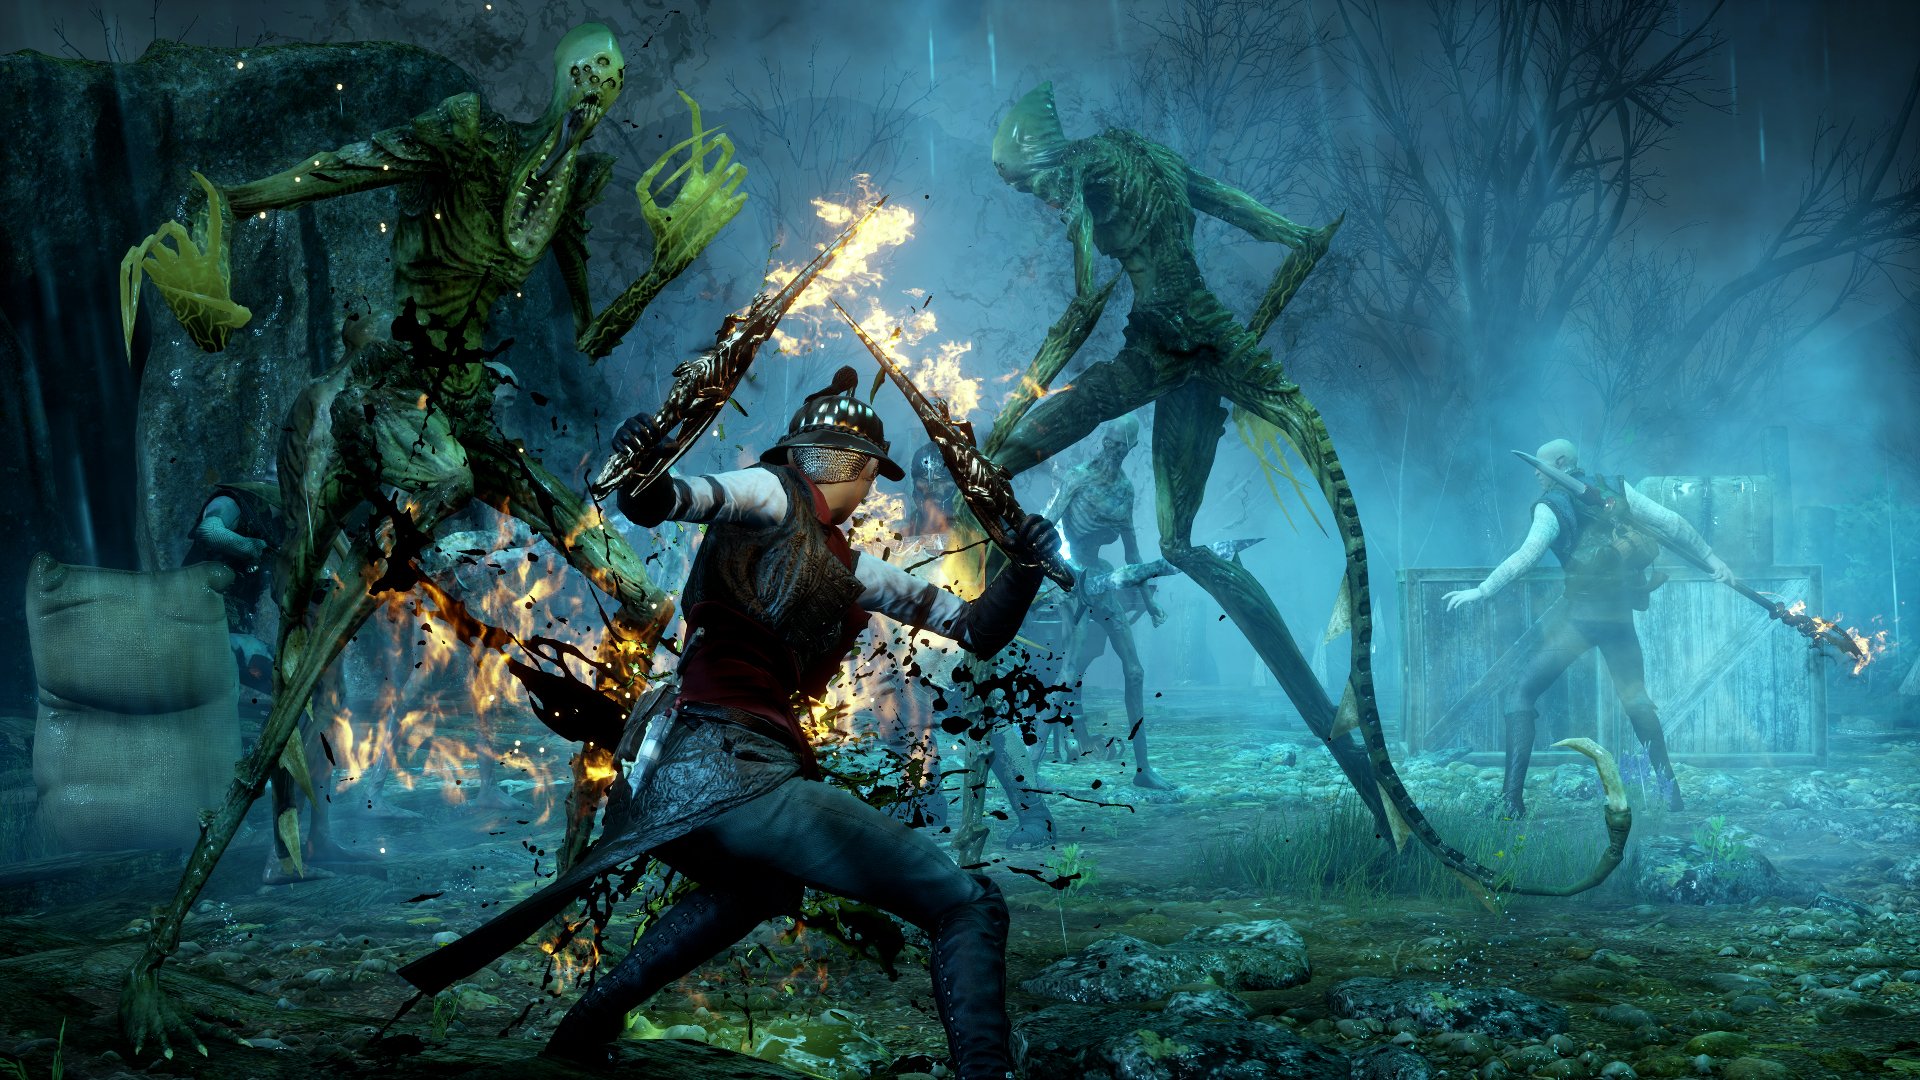 Dragon Age: Inquisition - Game of the Year Edition – PC Origin [Online Game Code]